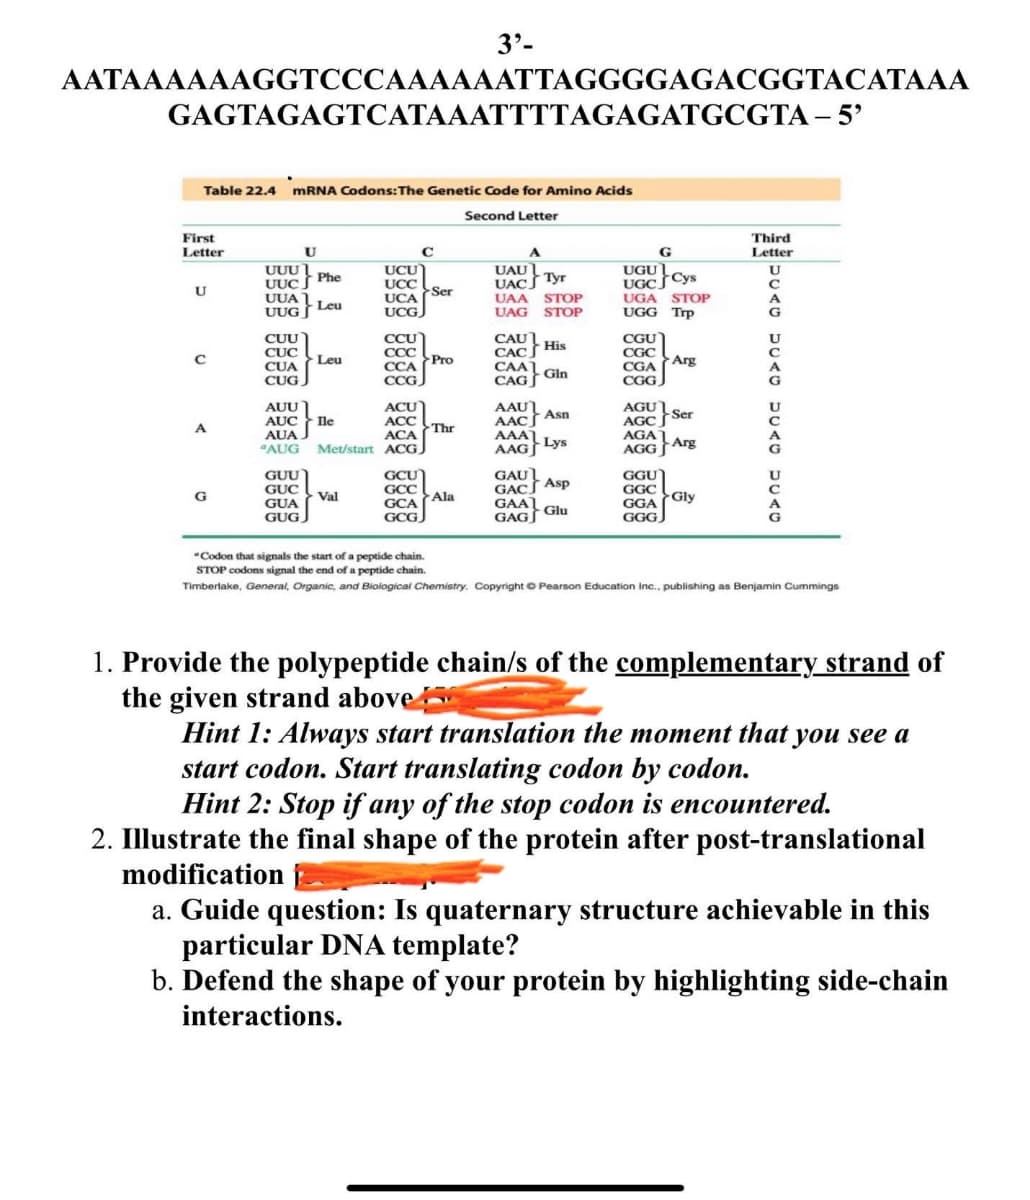 3'-
AATAAAAAAGGTCCCAAAAAATTAGGGGAGACGGTACATAAA
GAGTAGAGTCATAAATTTTAGAGATGCGTA - 5'
Table 22.4 mRNA Codons: The Genetic Code for Amino Acids
Second Letter
First
Letter
U
C
A
G
Third
Letter
UUU
Phe
UUC
U
UUA
UCU
UCC
UCA
Ser
Leu
UUG
UCG
UAU
UAC Tyr
UAA STOP
UAG STOP
UGU
U
UGC Cys
UGA
UGG Trp
STOP
A
G
CUU
CCU
CUC
CCC
CAC
CAU His
CGU
CGC
C
Leu
Pro
Arg
CUA
CCA
CAA
CGA
Gln
CUG
CCG.
CAG
CGG
AUU
ACU
AAUT
AGU
Asn.
AUC
Ile
ACC
AAC
A
Thr
AGC Ser
AUA
ACA
AAA
AGA
"AUG
Met/start ACG
AAG Lys
AGG
Arg
GUU
GCU
GAU
GUC
GCC
G
Val
Ala
GAC Asp
GGU
U
GGC
GUA
GUG
GCA
GAA
GGA
Gly
Glu
GCG
GAG
GGG
"Codon that signals the start of a peptide chain.
STOP codons signal the end of a peptide chain.
Timberlake, General, Organic, and Biological Chemistry. Copyright Pearson Education Inc.. publishing as Benjamin Cummings
1. Provide the polypeptide chain/s of the complementary strand of
the given strand above
Hint 1: Always start translation the moment that you see a
start codon. Start translating codon by codon.
Hint 2: Stop if any of the stop codon is encountered.
2. Illustrate the final shape of the protein after post-translational
modification
a. Guide question: Is quaternary structure achievable in this
particular DNA template?
b. Defend the shape of your protein by highlighting side-chain
interactions.